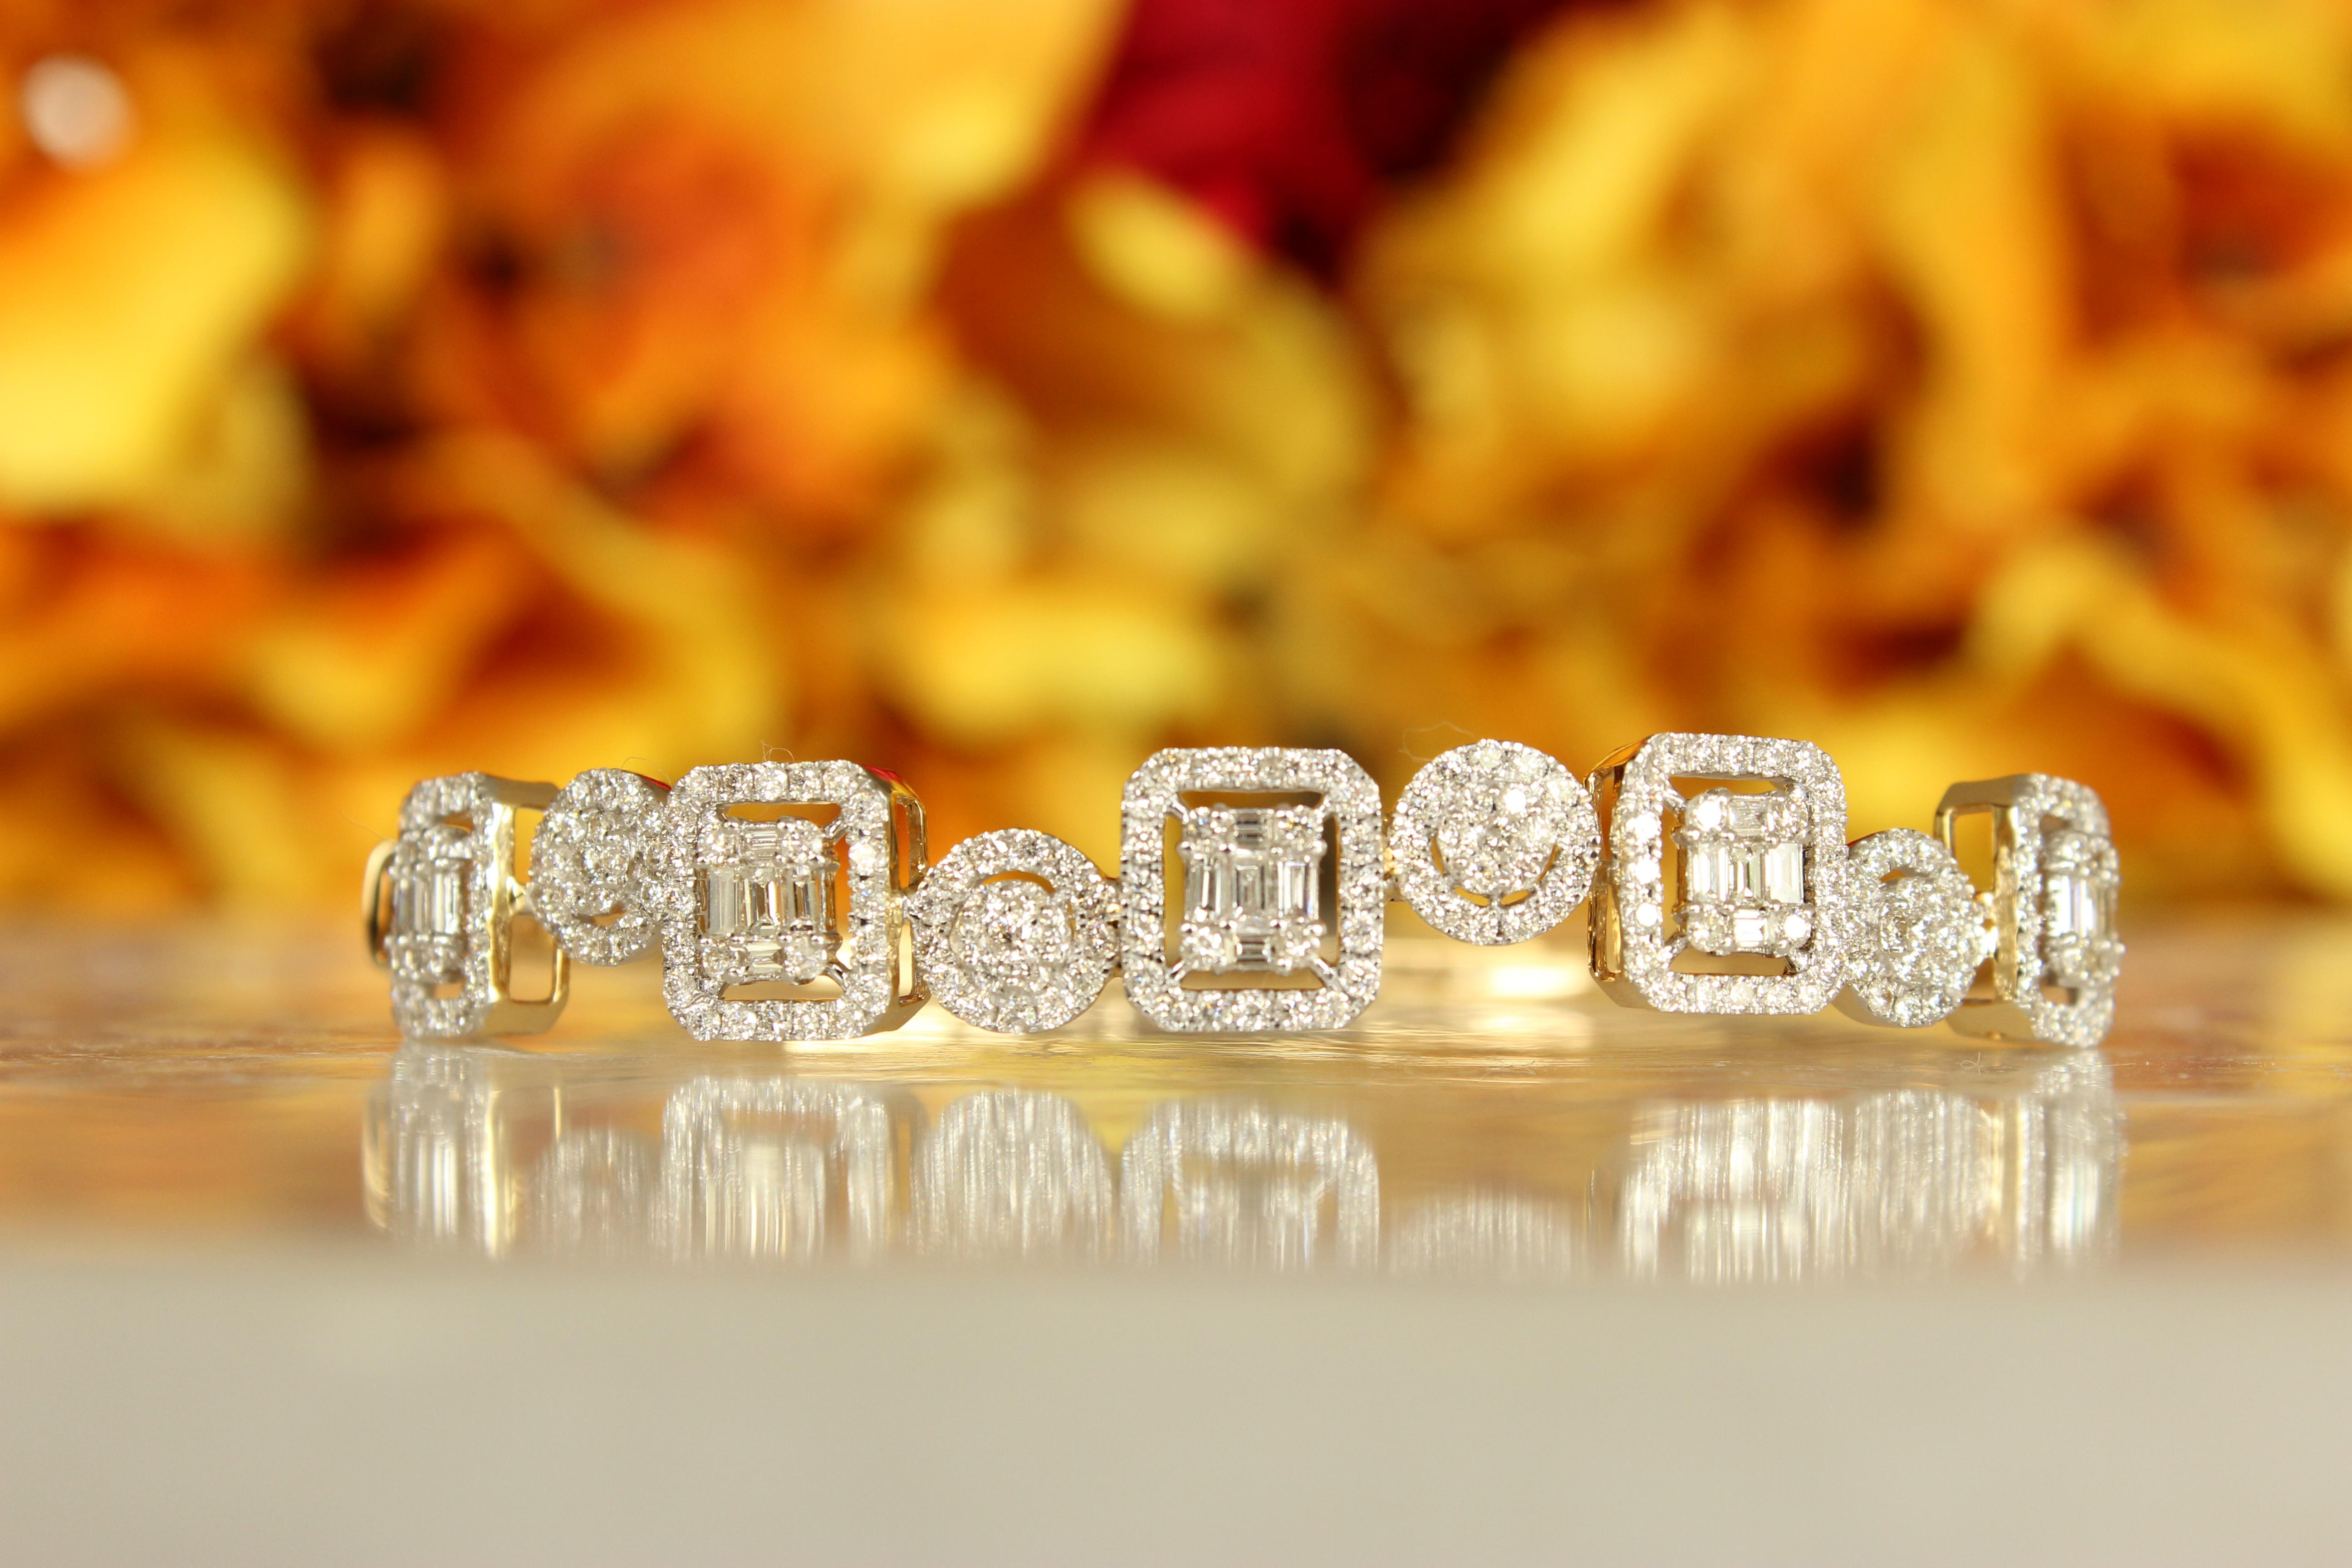 The Baguette & Round Cut Diamond Halo Bracelet is a series of exquisitely cut diamonds, possibly of the baguettes and rounds, surrounded by halos of smaller, round-cut diamonds. The setting is in a precious metal gold. Each link appears meticulously